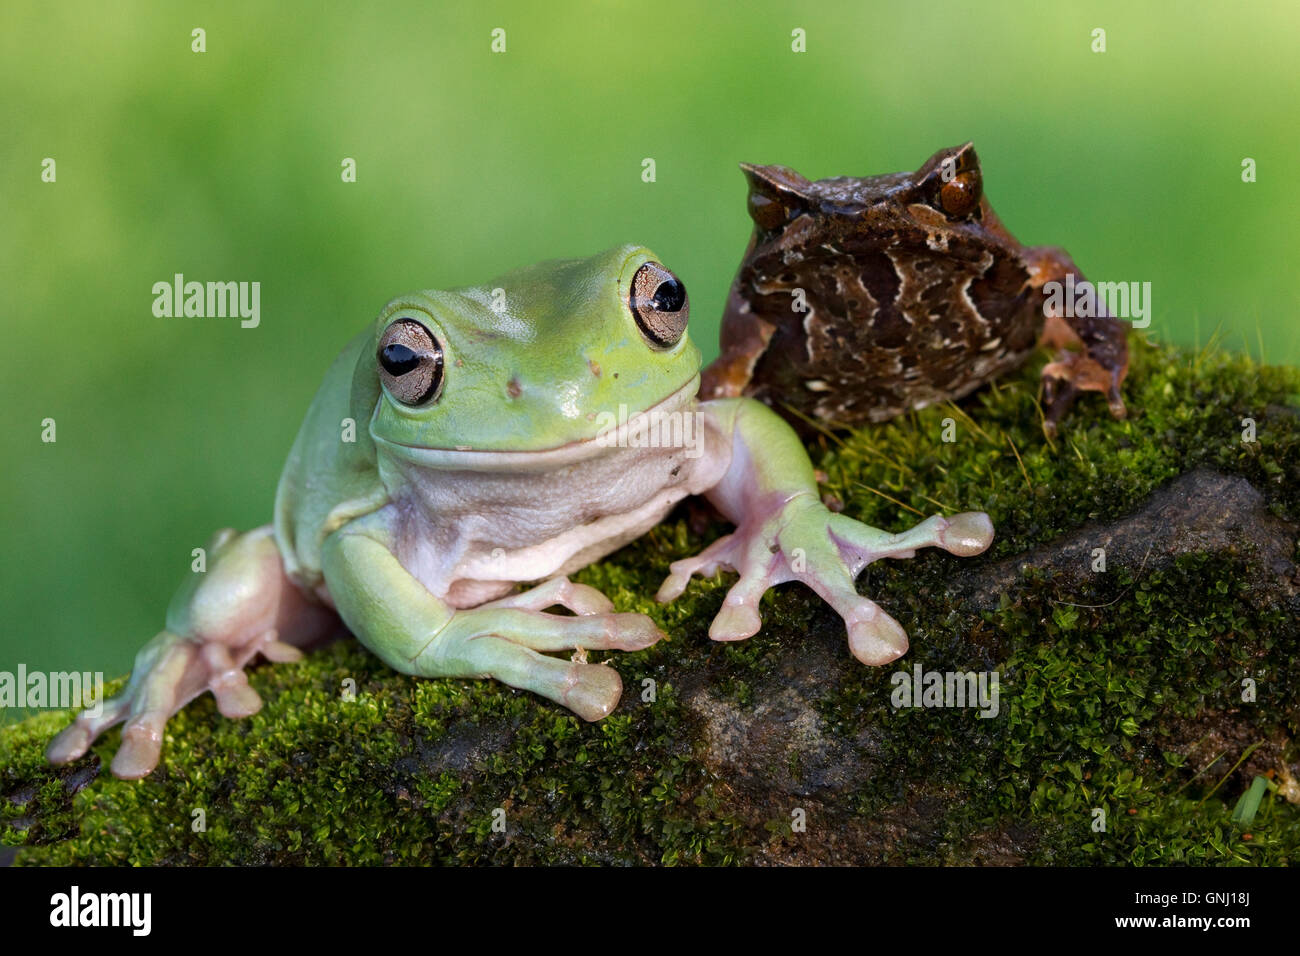 Javan gliding Tree frog and toad sitting side by side, Indonesia Stock Photo